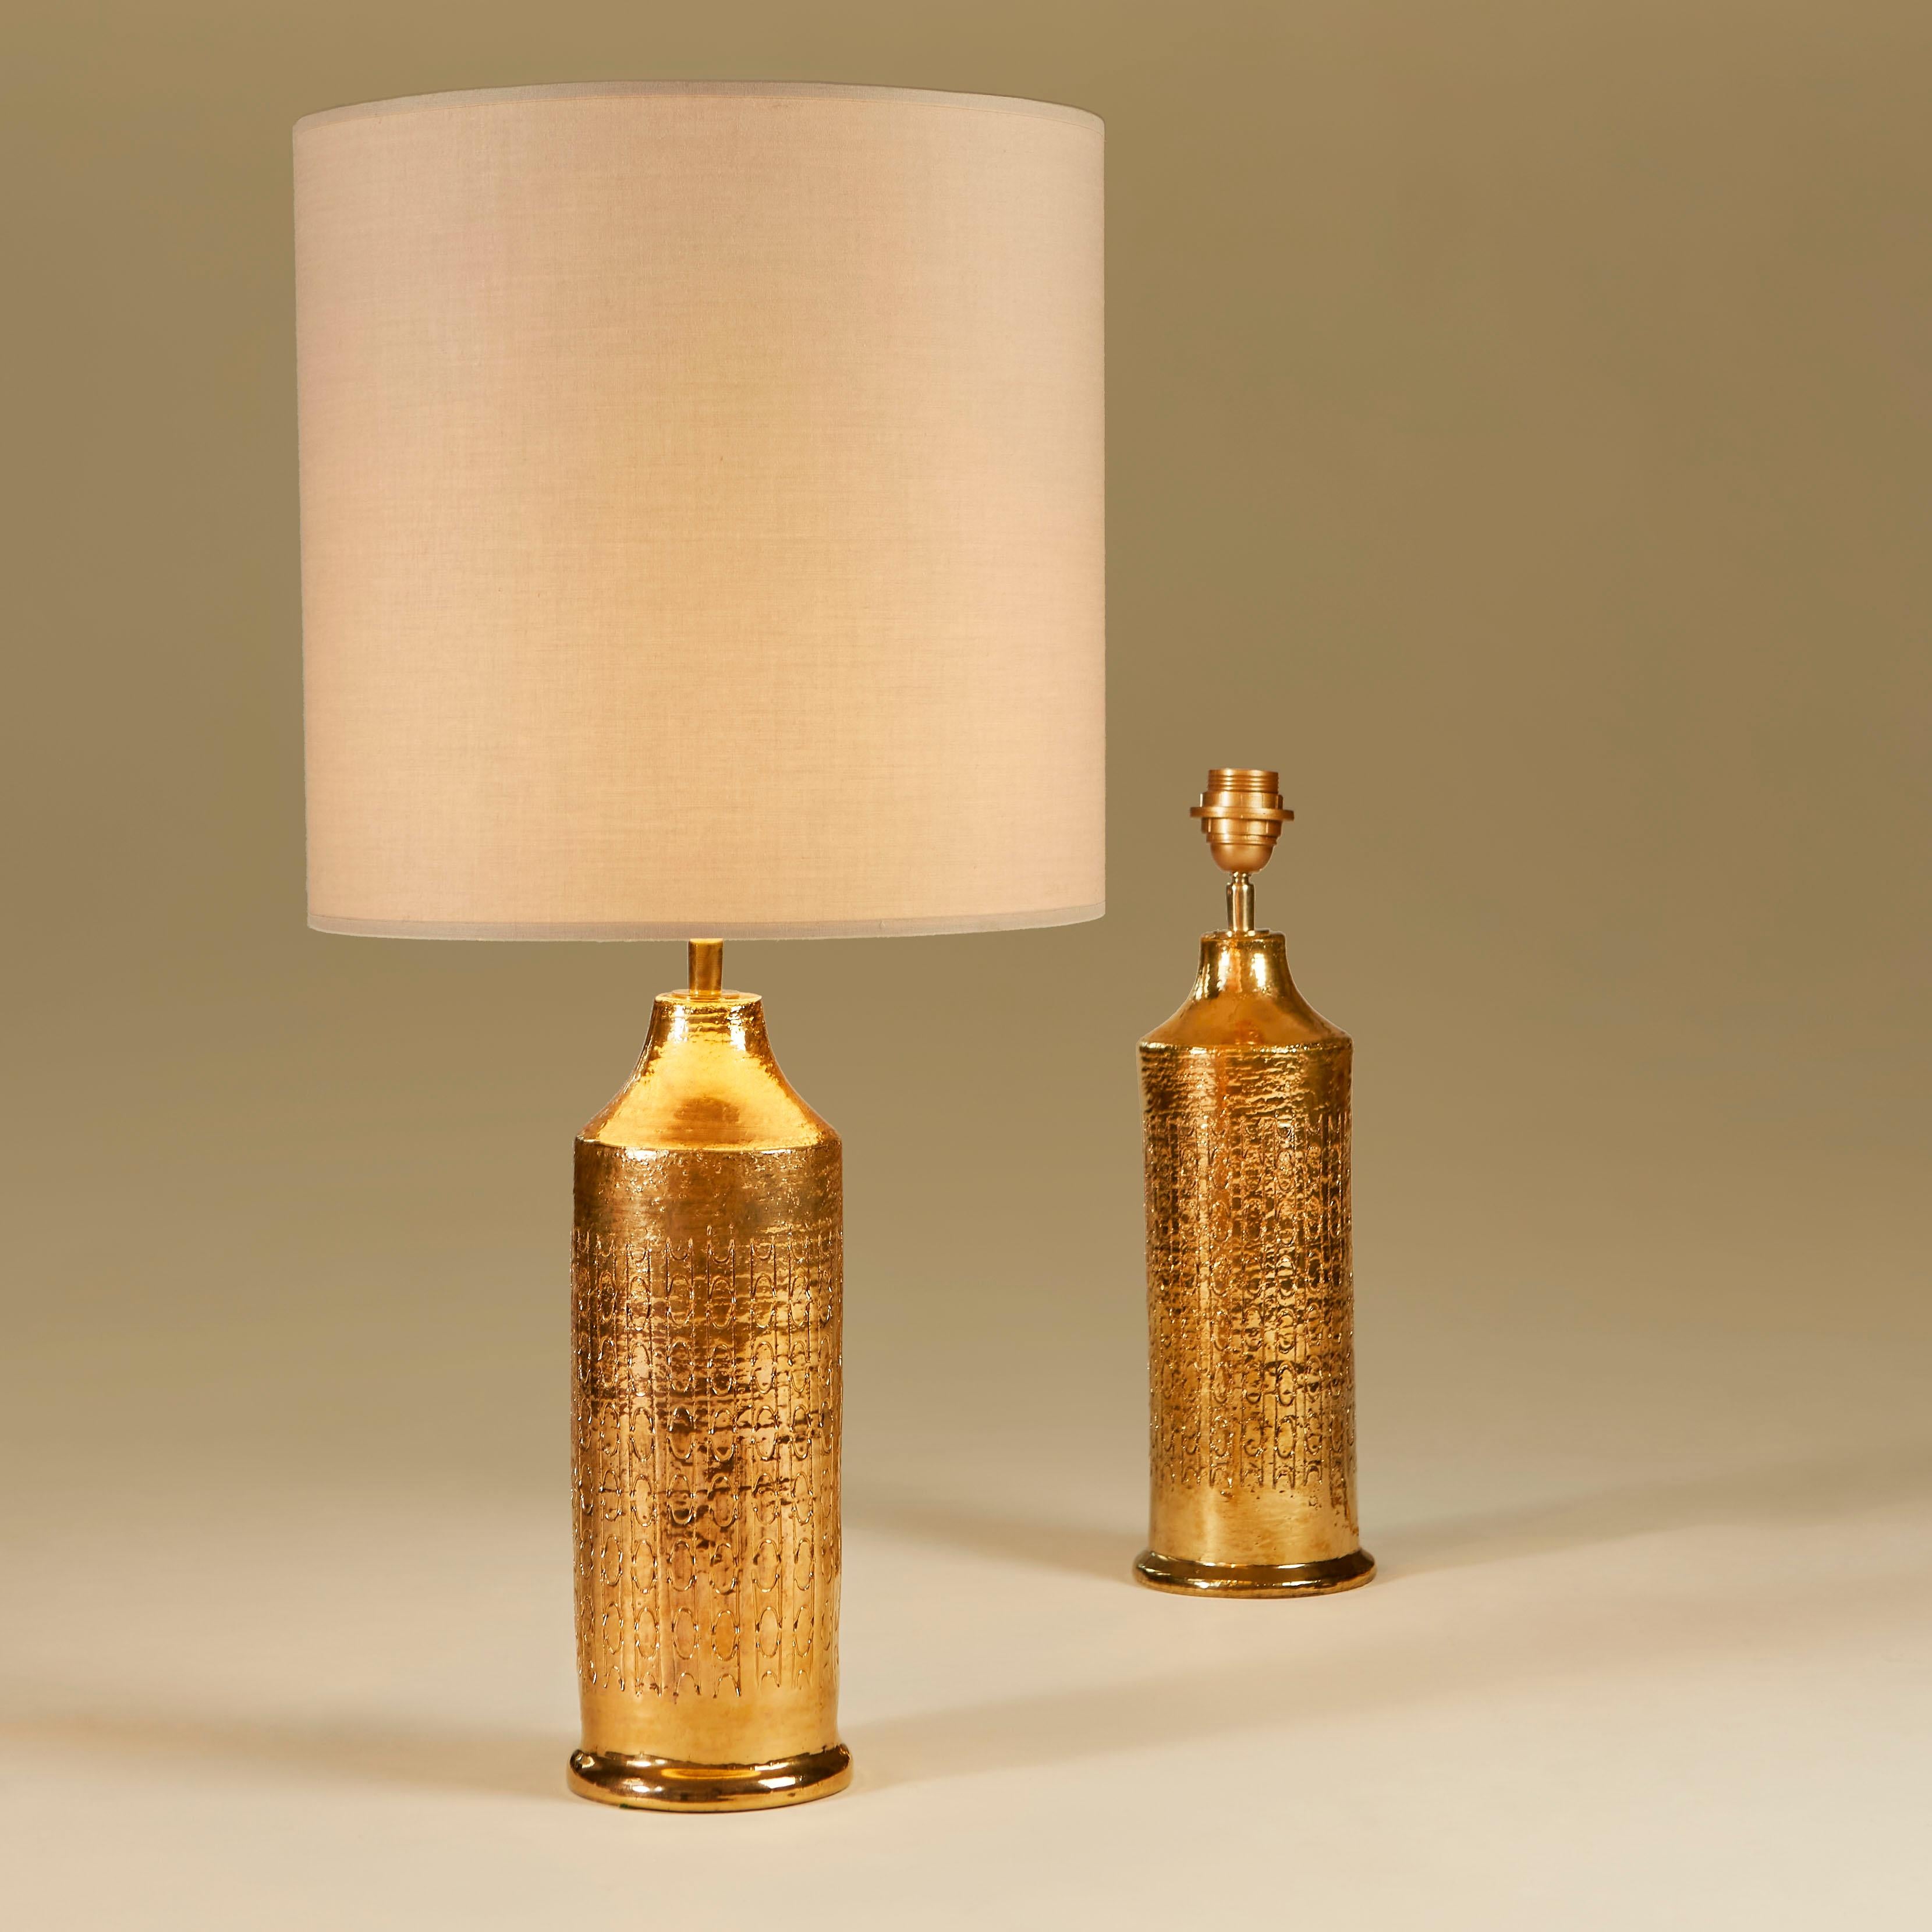 Beautiful pair of large ceramic Bitossi lamps with hand incised decorative pattern in rich gold glaze.

Size including the shade is 73.5cm high x 35cm diameter.